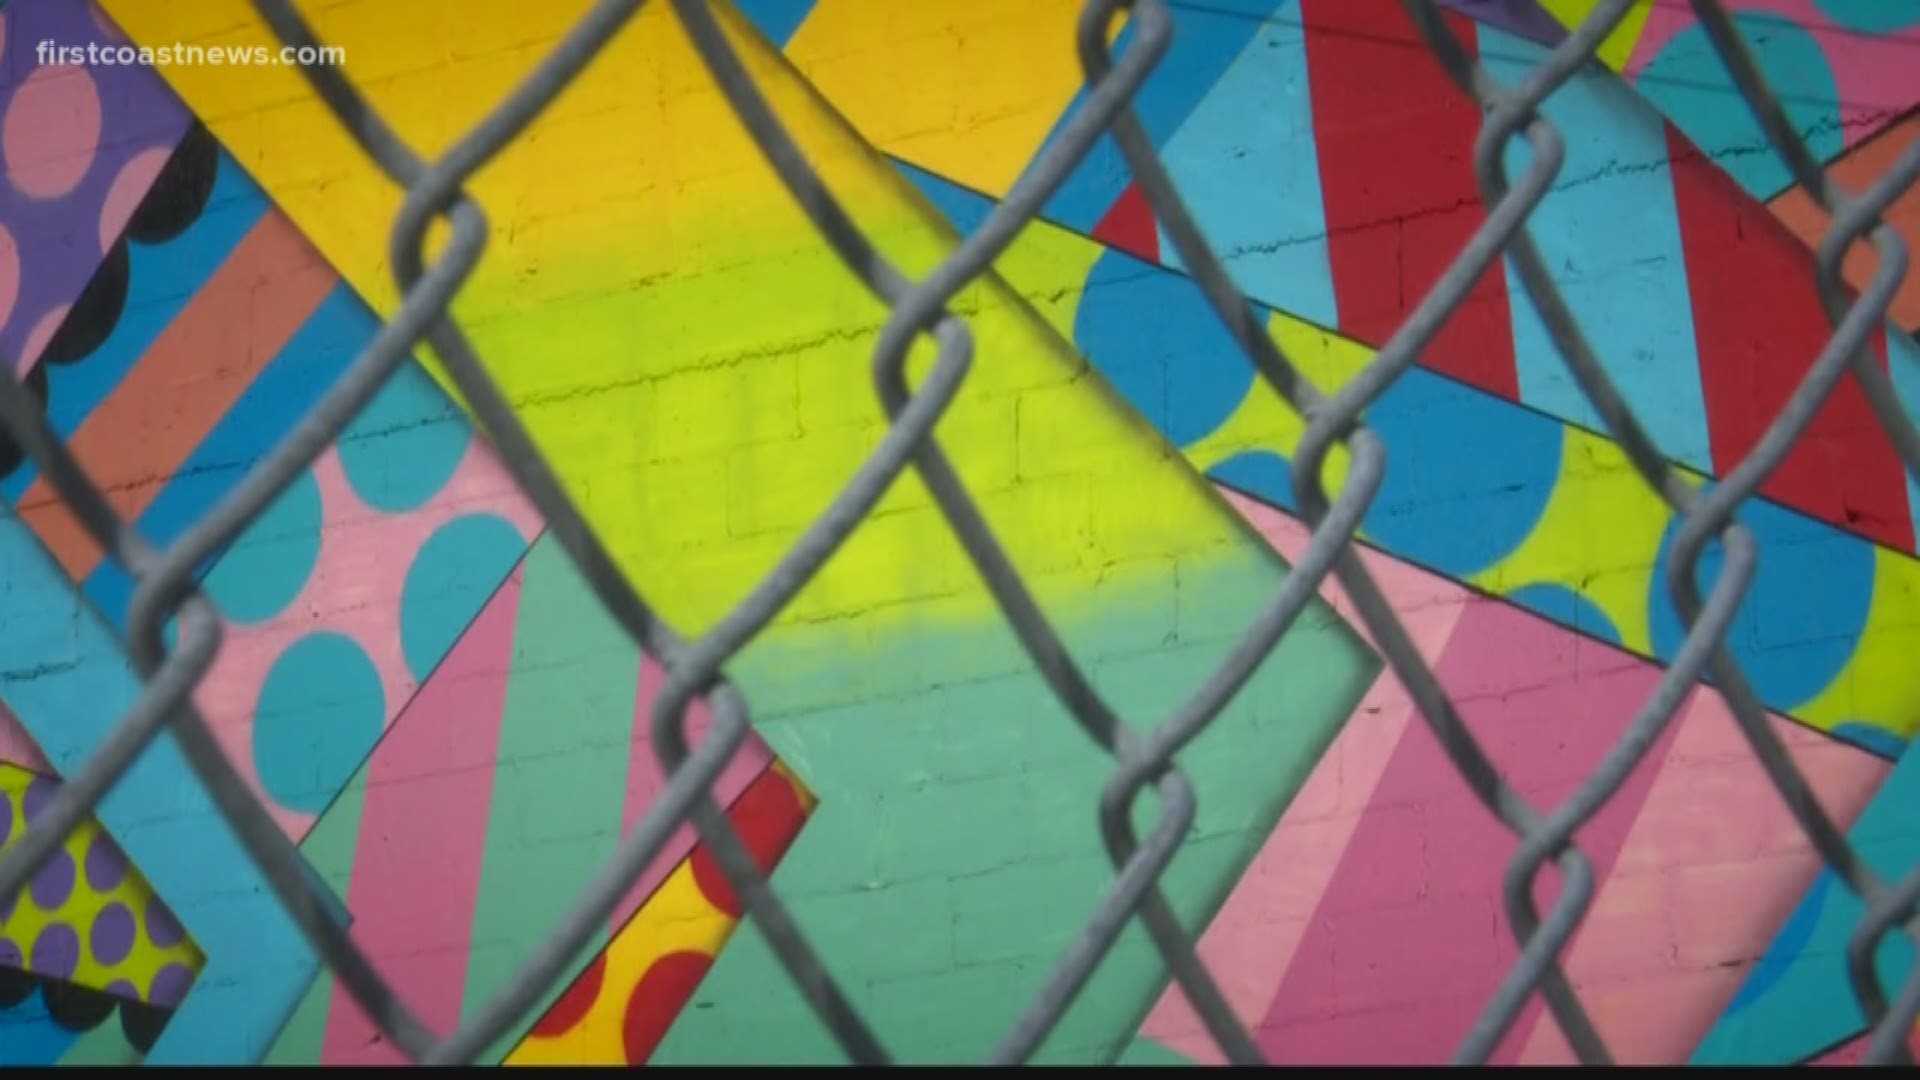 Curtis Dvorak gives us a tour of the many murals found in downtown Jacksonville